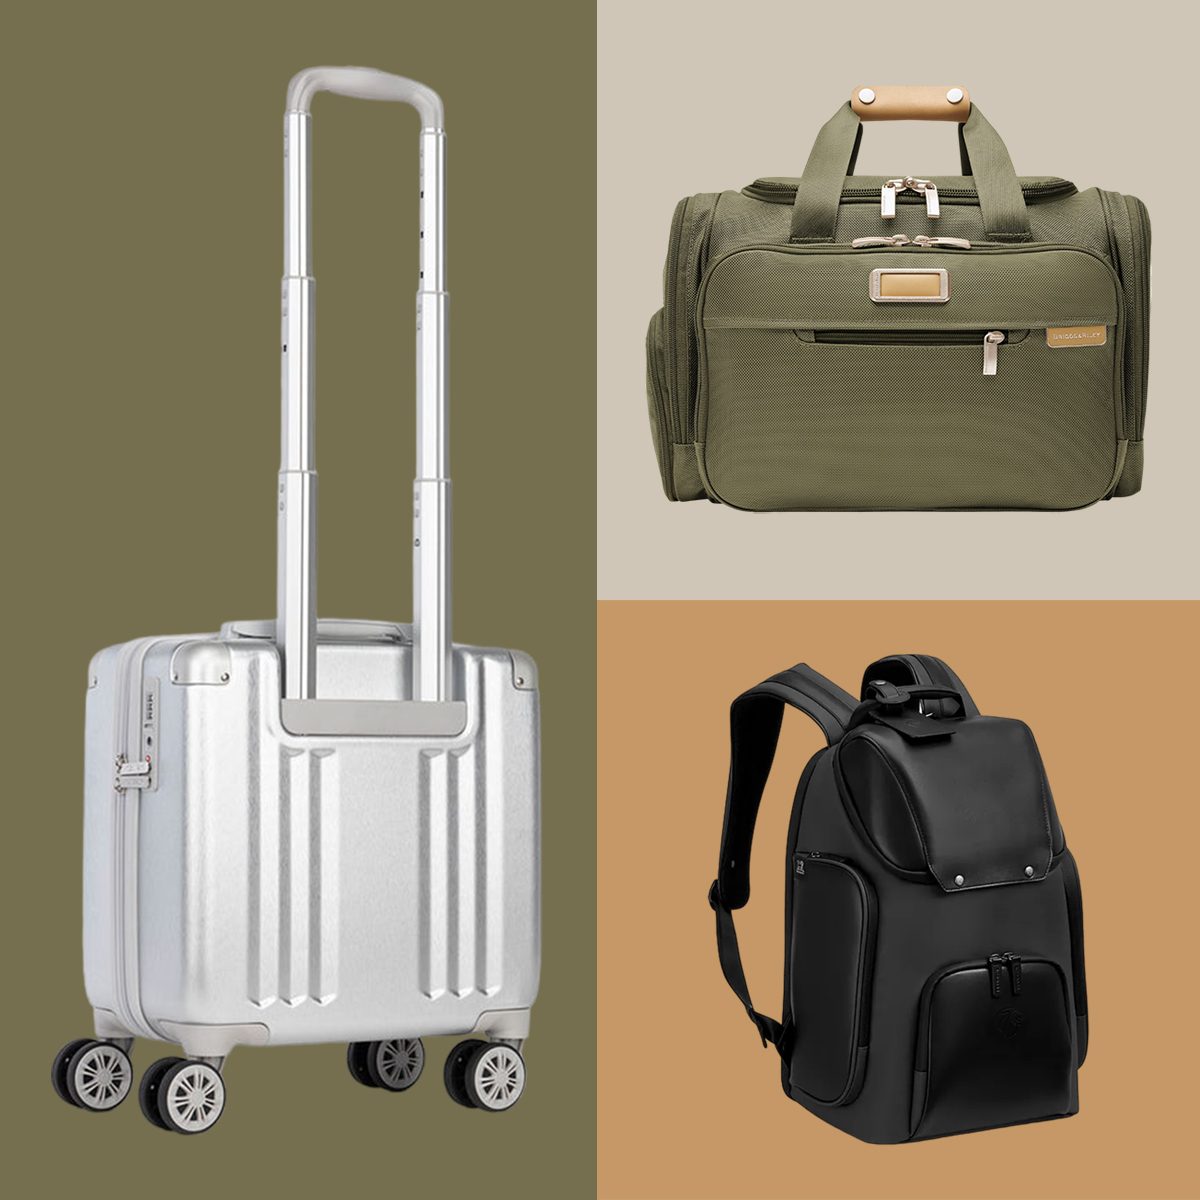 Underneath It All: The 5 Best Underseat Luggage Pieces!